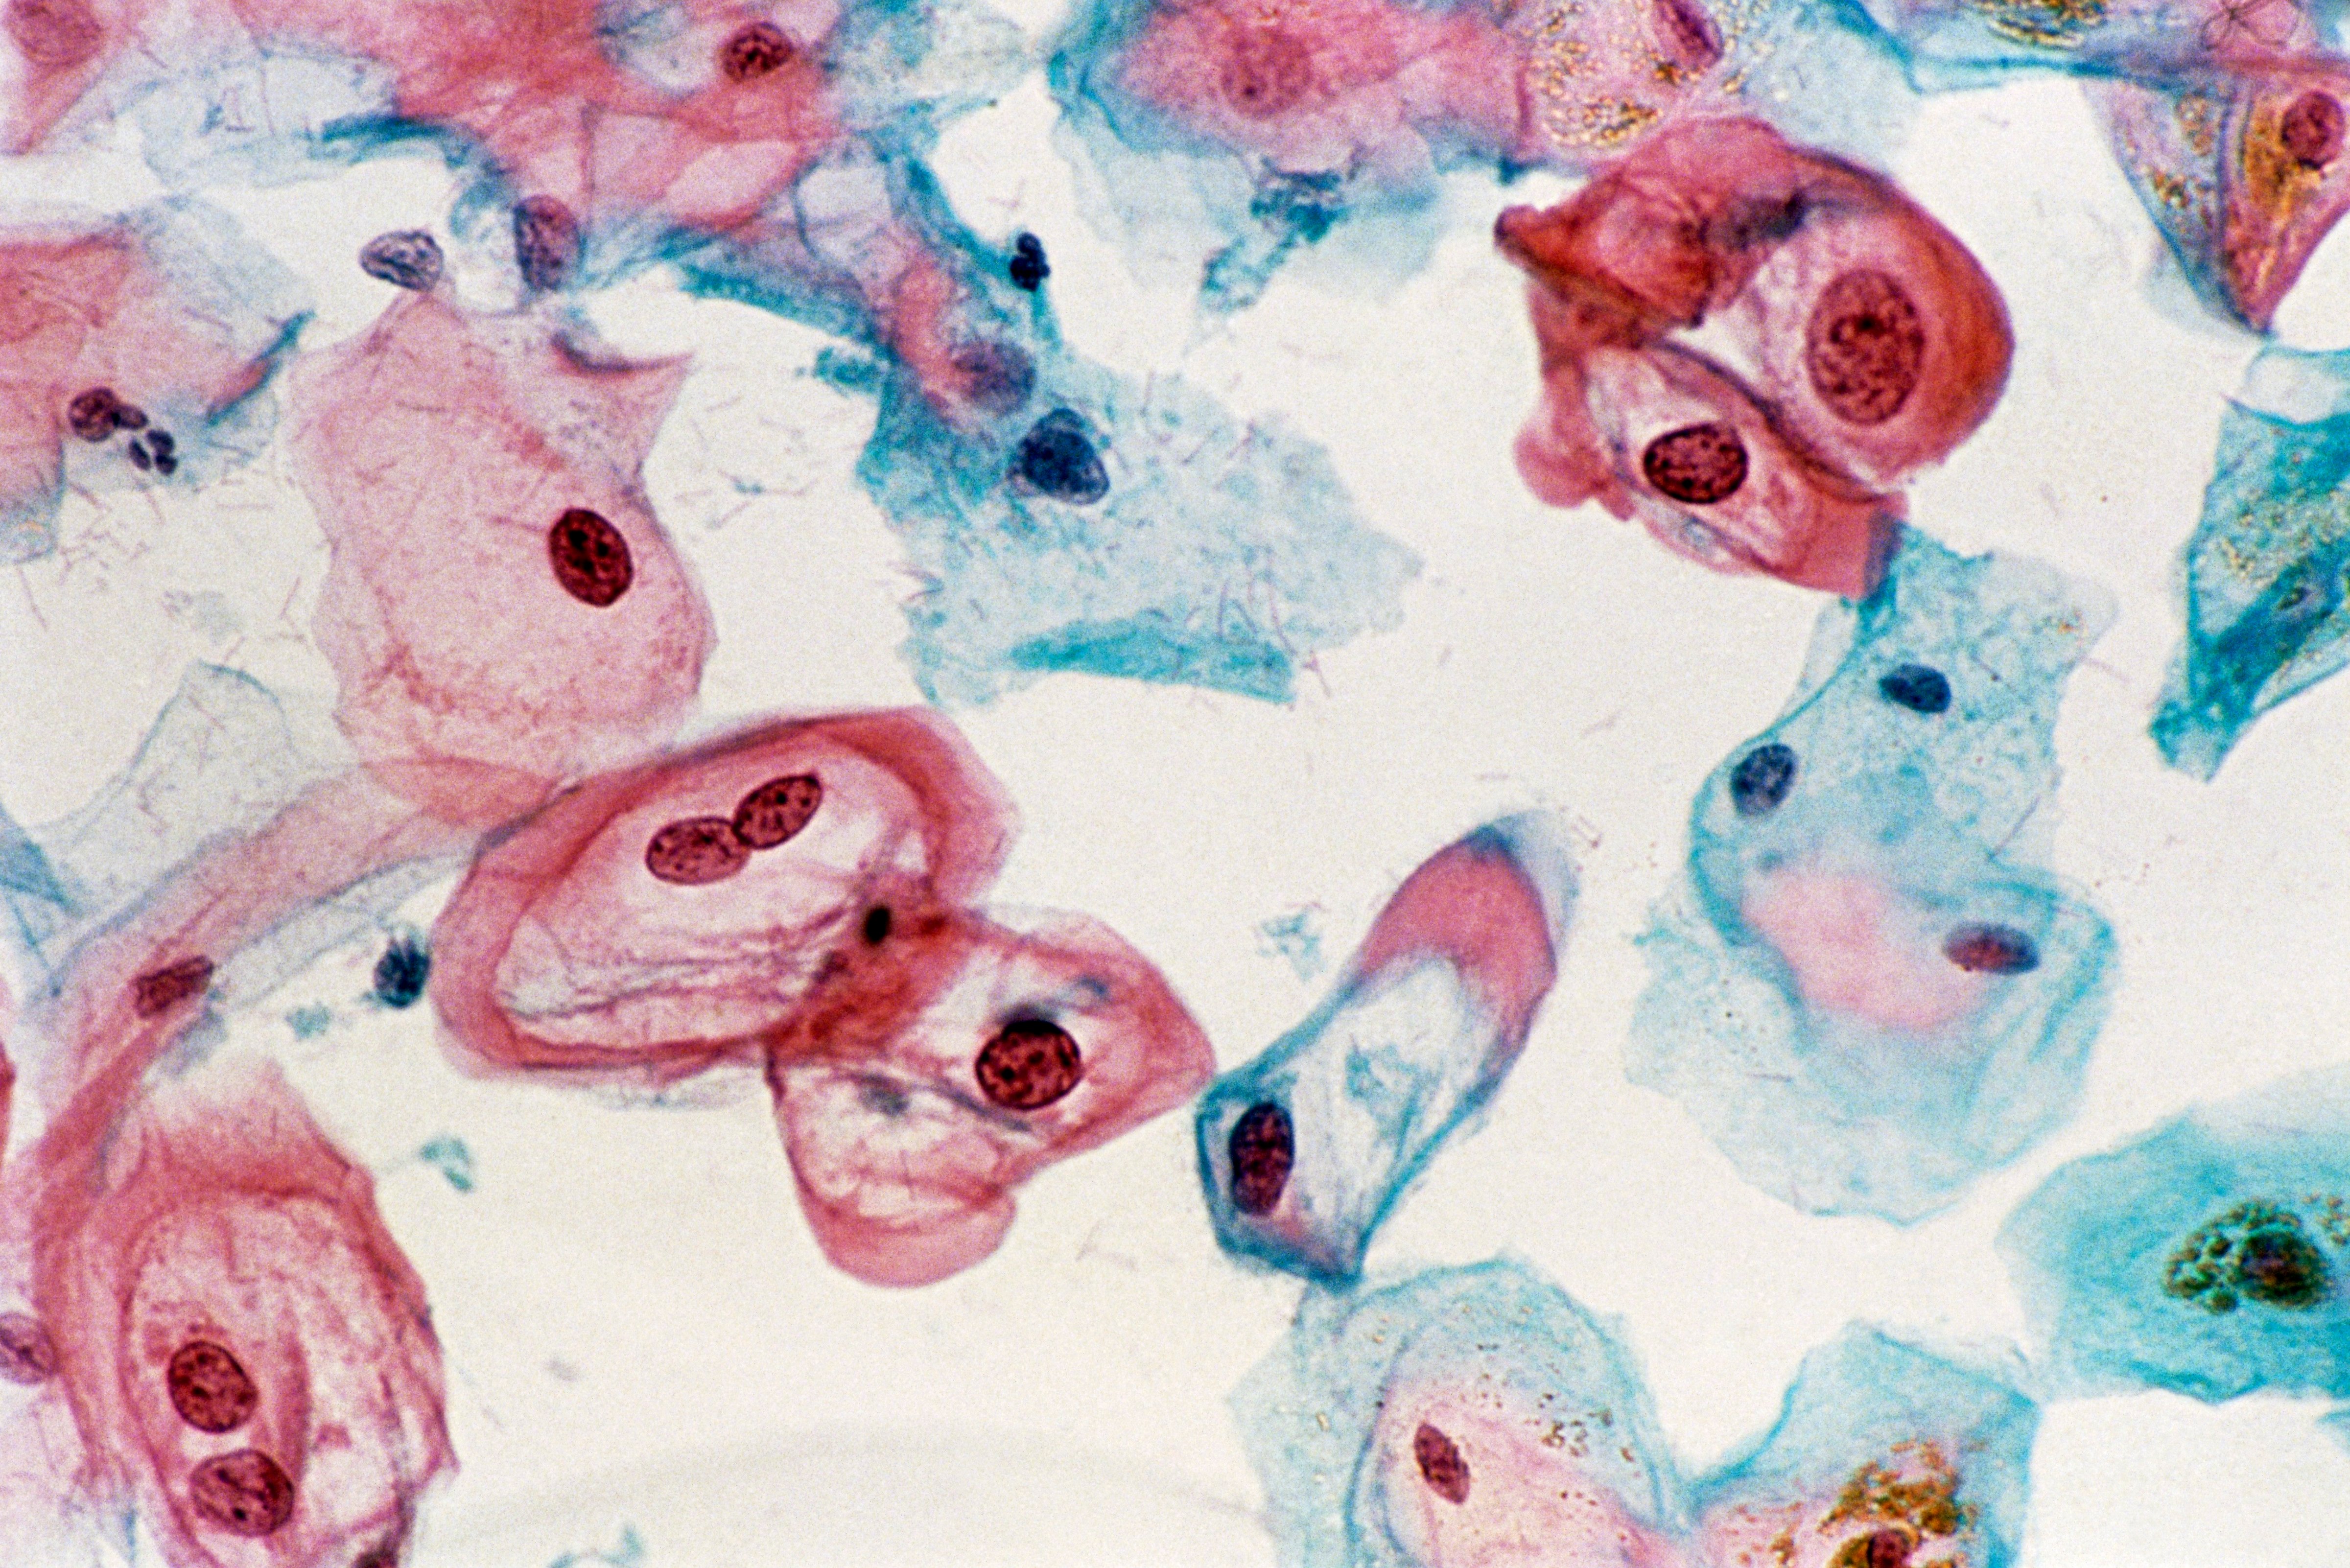 A cervical smear revealing cells infected with the human papilloma virus (HPV). (SCIENCE PHOTO LIBRARY&mdash;Getty Images/Science Photo Libra)